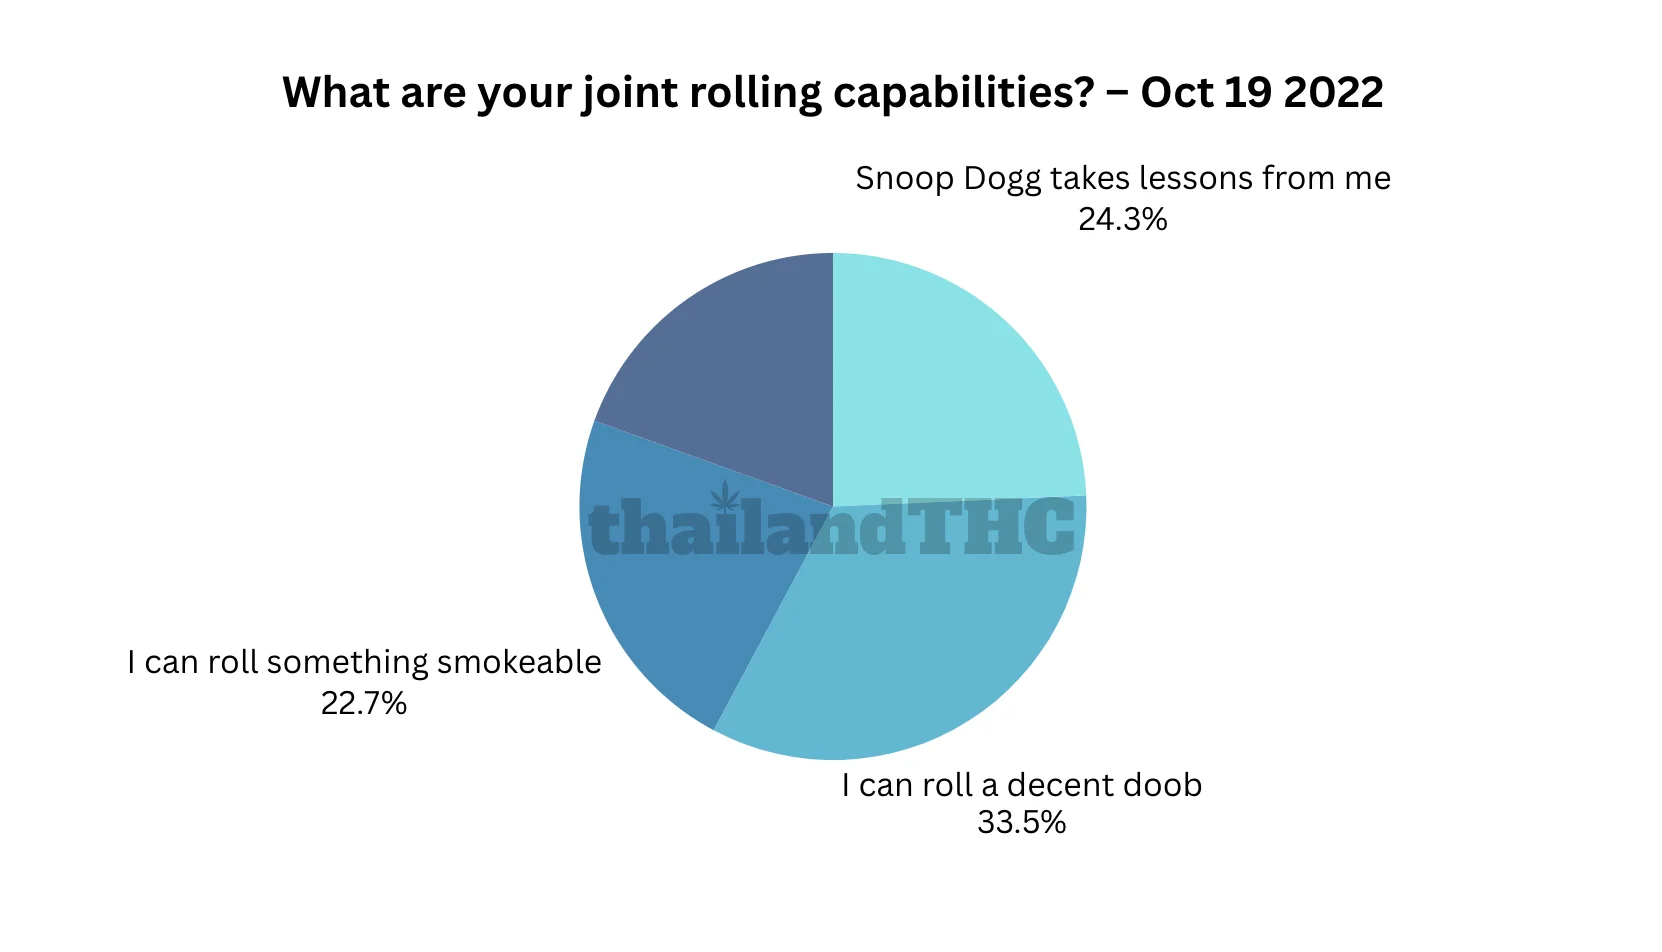 What are your joint rolling capabilities?